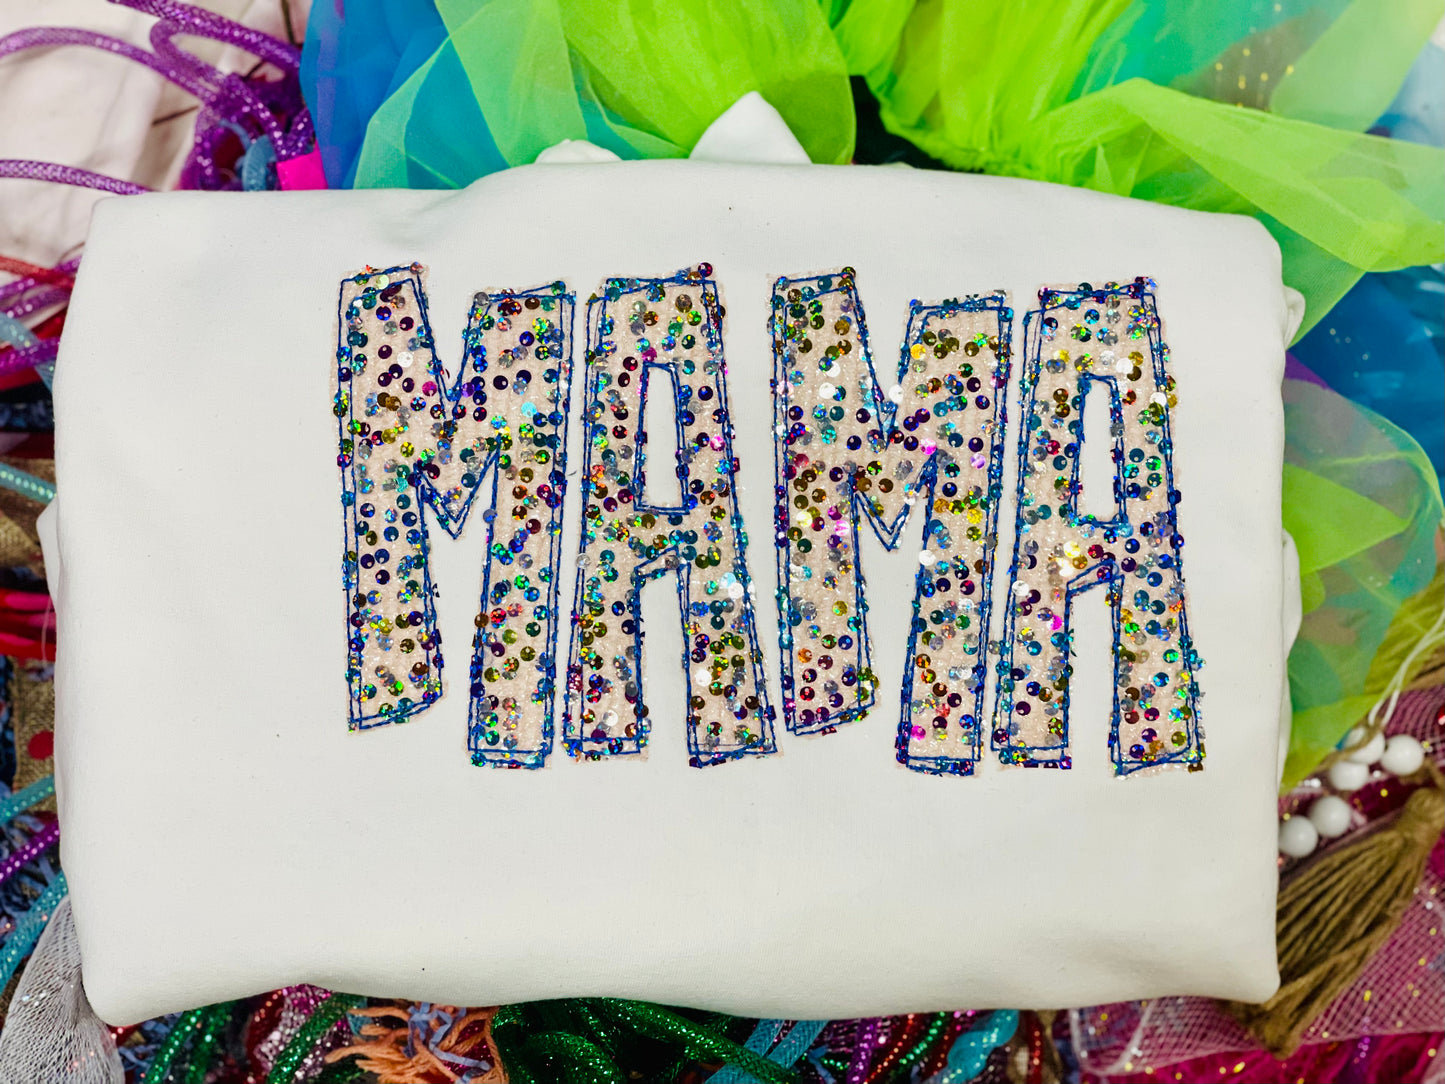 Embroidered MAMA Tee with Colorful Sequin Fabric - Can put ANY Mascot or Name!